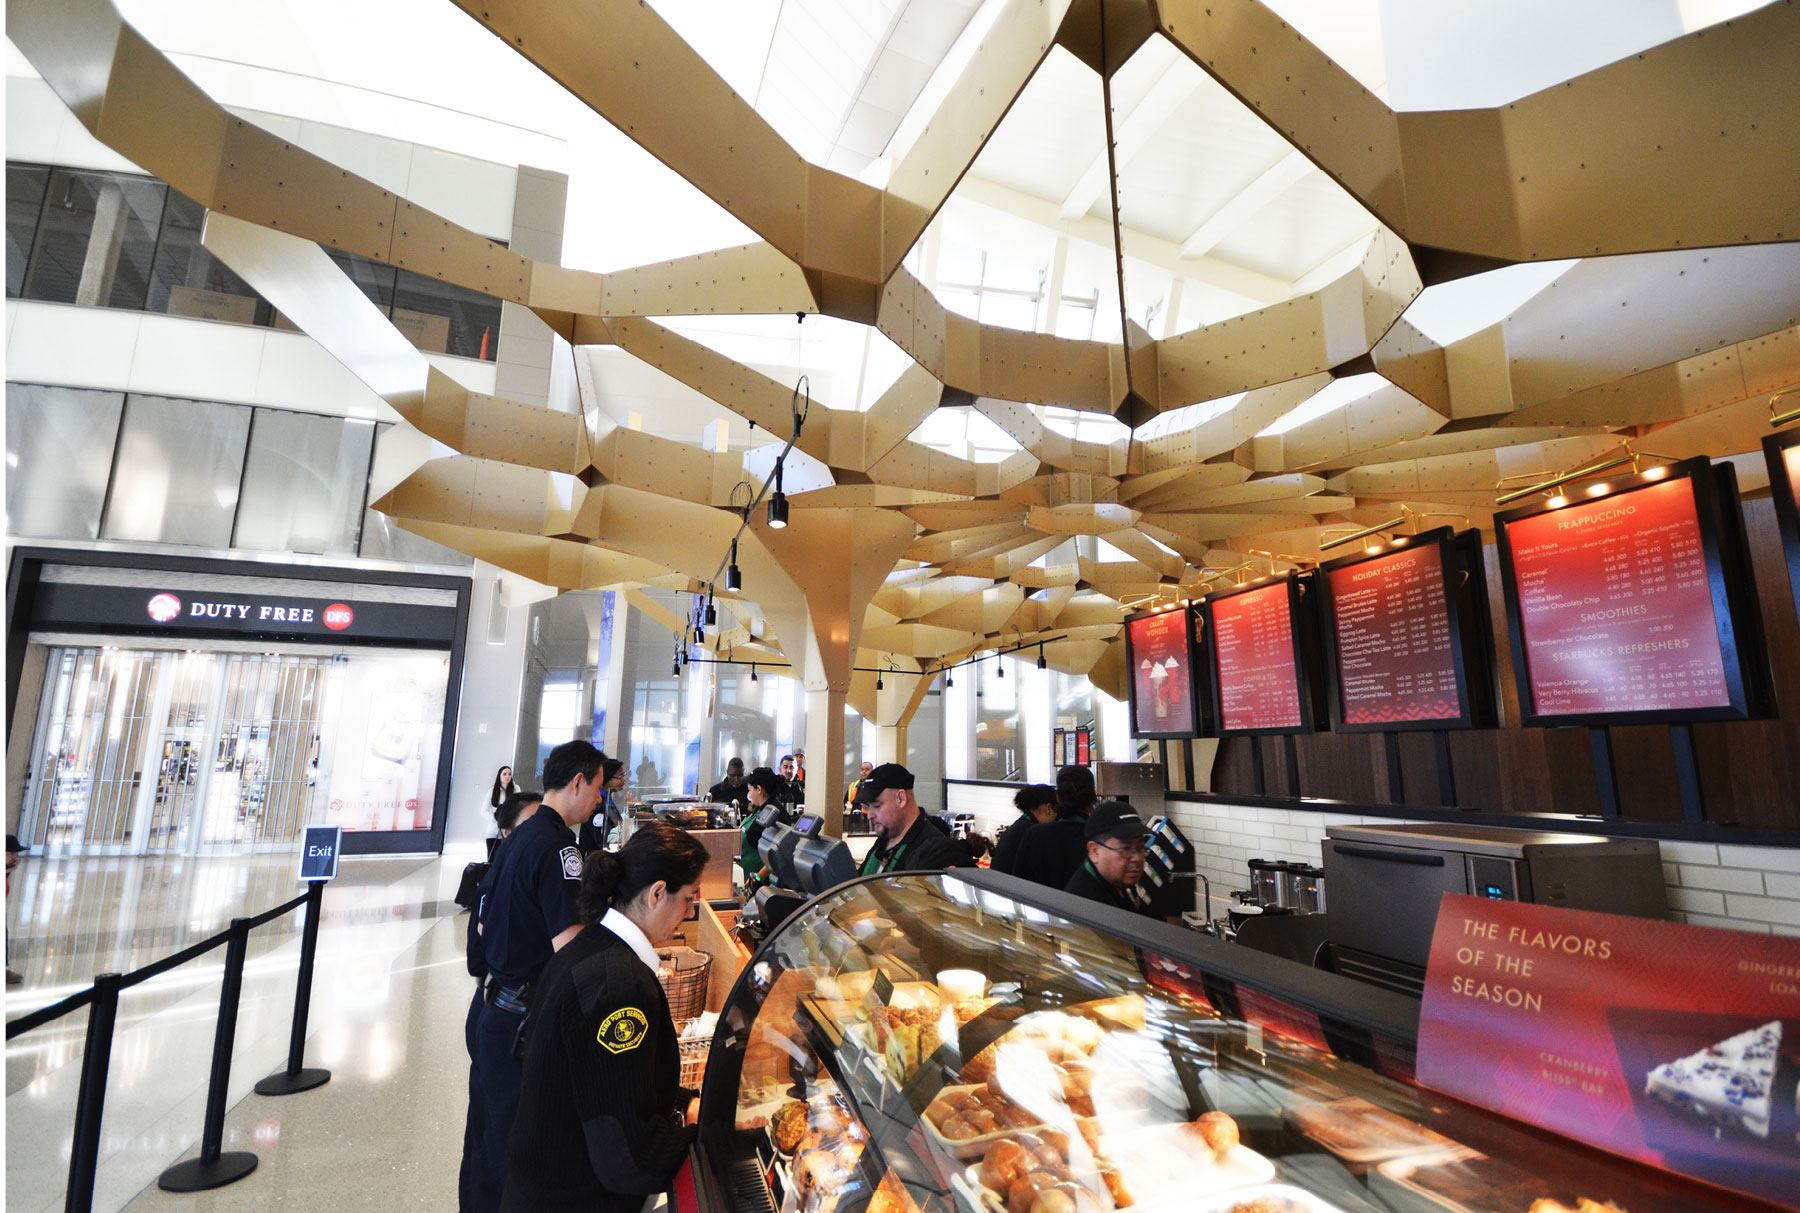 This Starbucks in LAX Airport features an Arktura ceiling canopy. There are people standing in line ordering. 